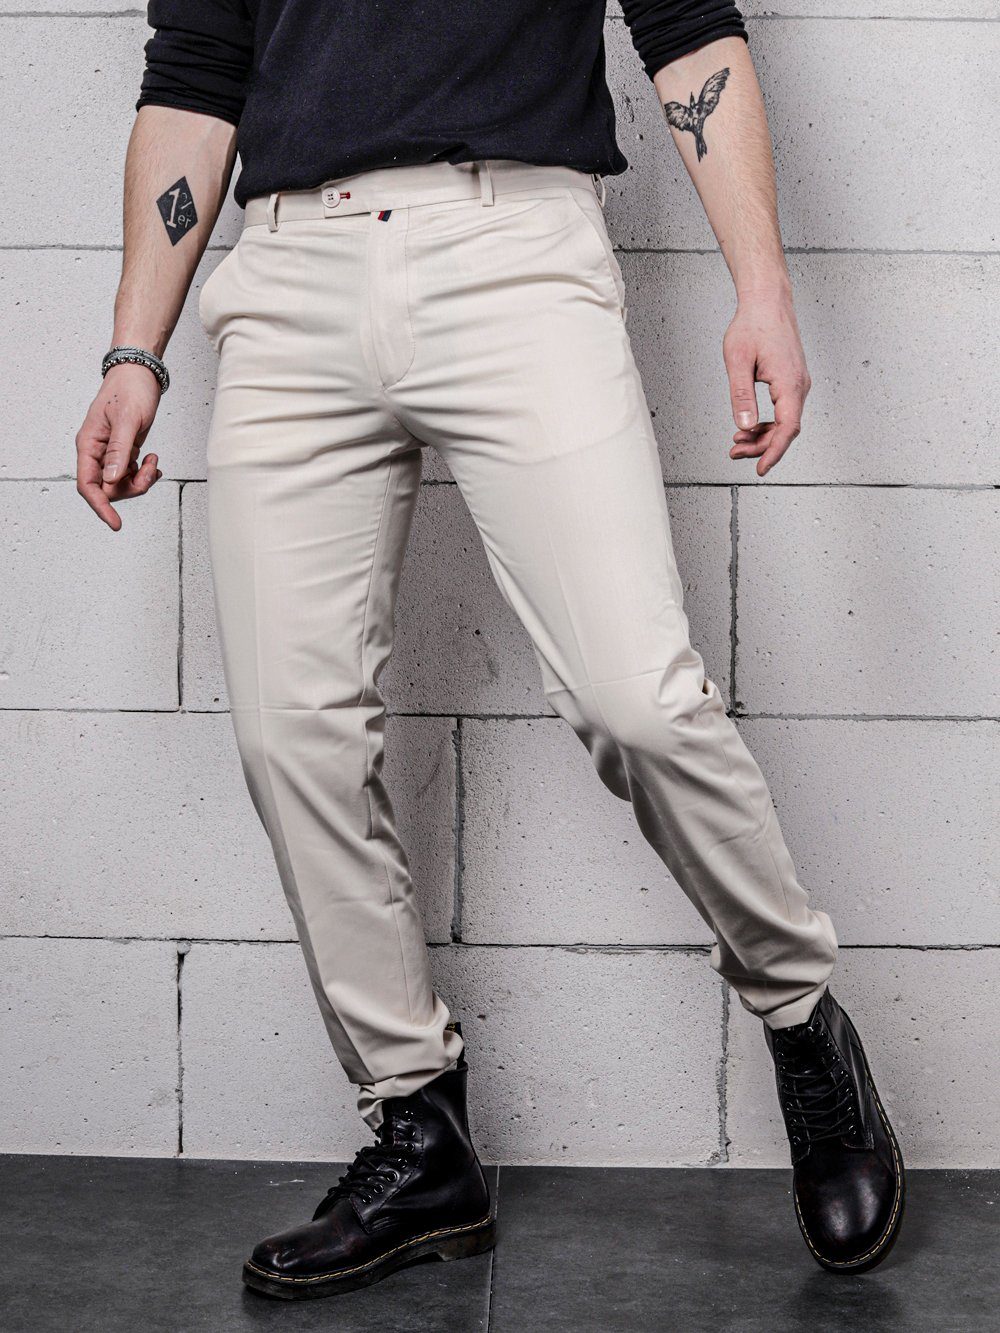 A man in VANILLA PANTS is leaning against a brick wall.